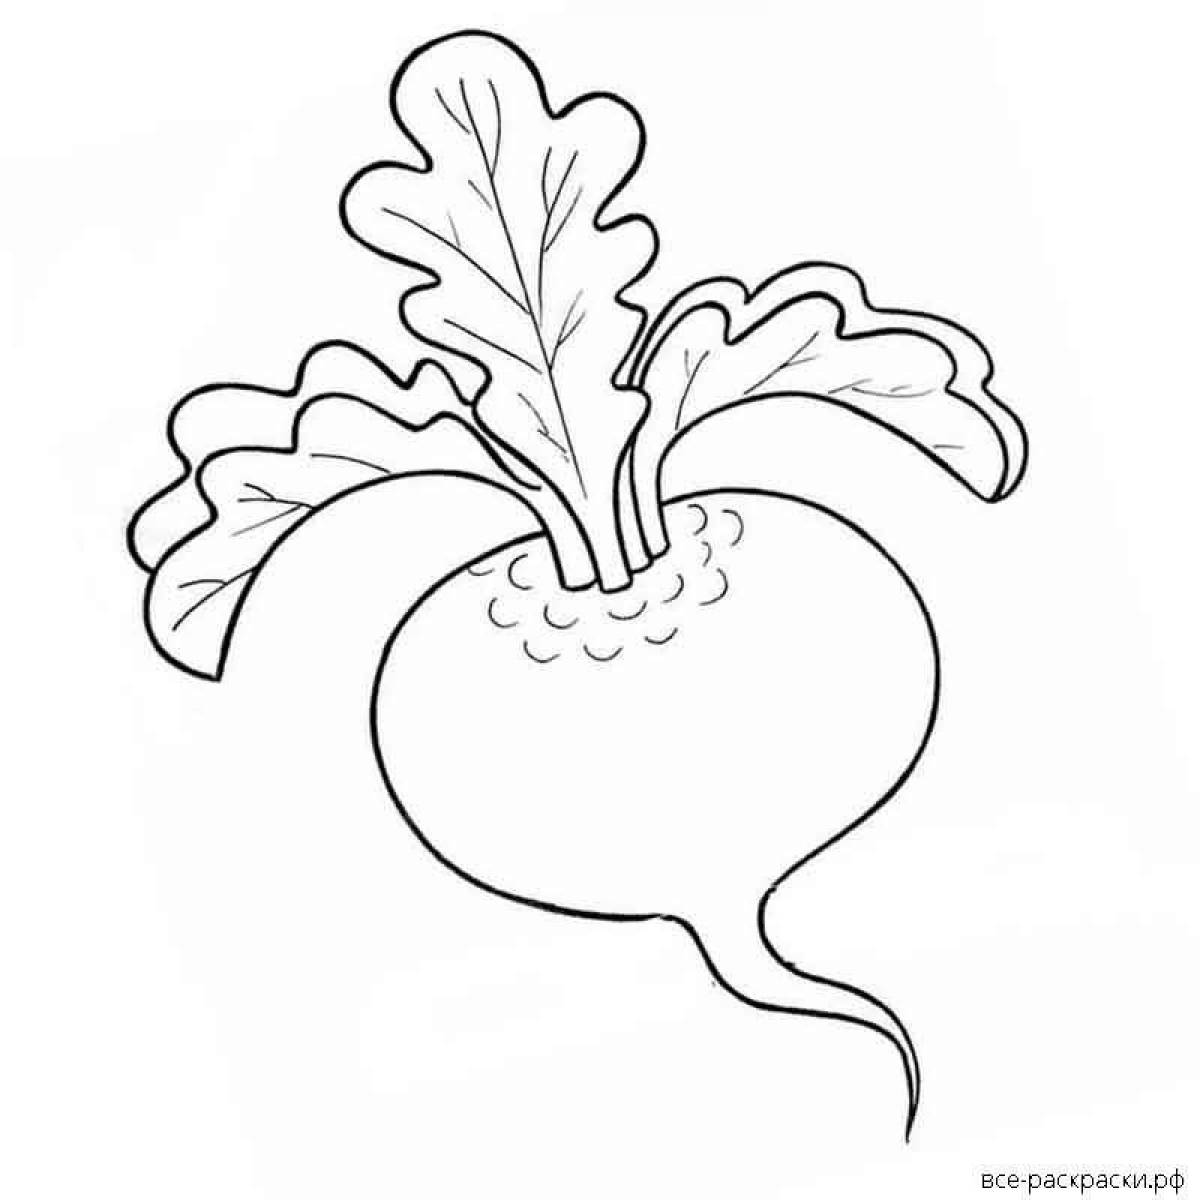 Adorable turnip coloring book for kids